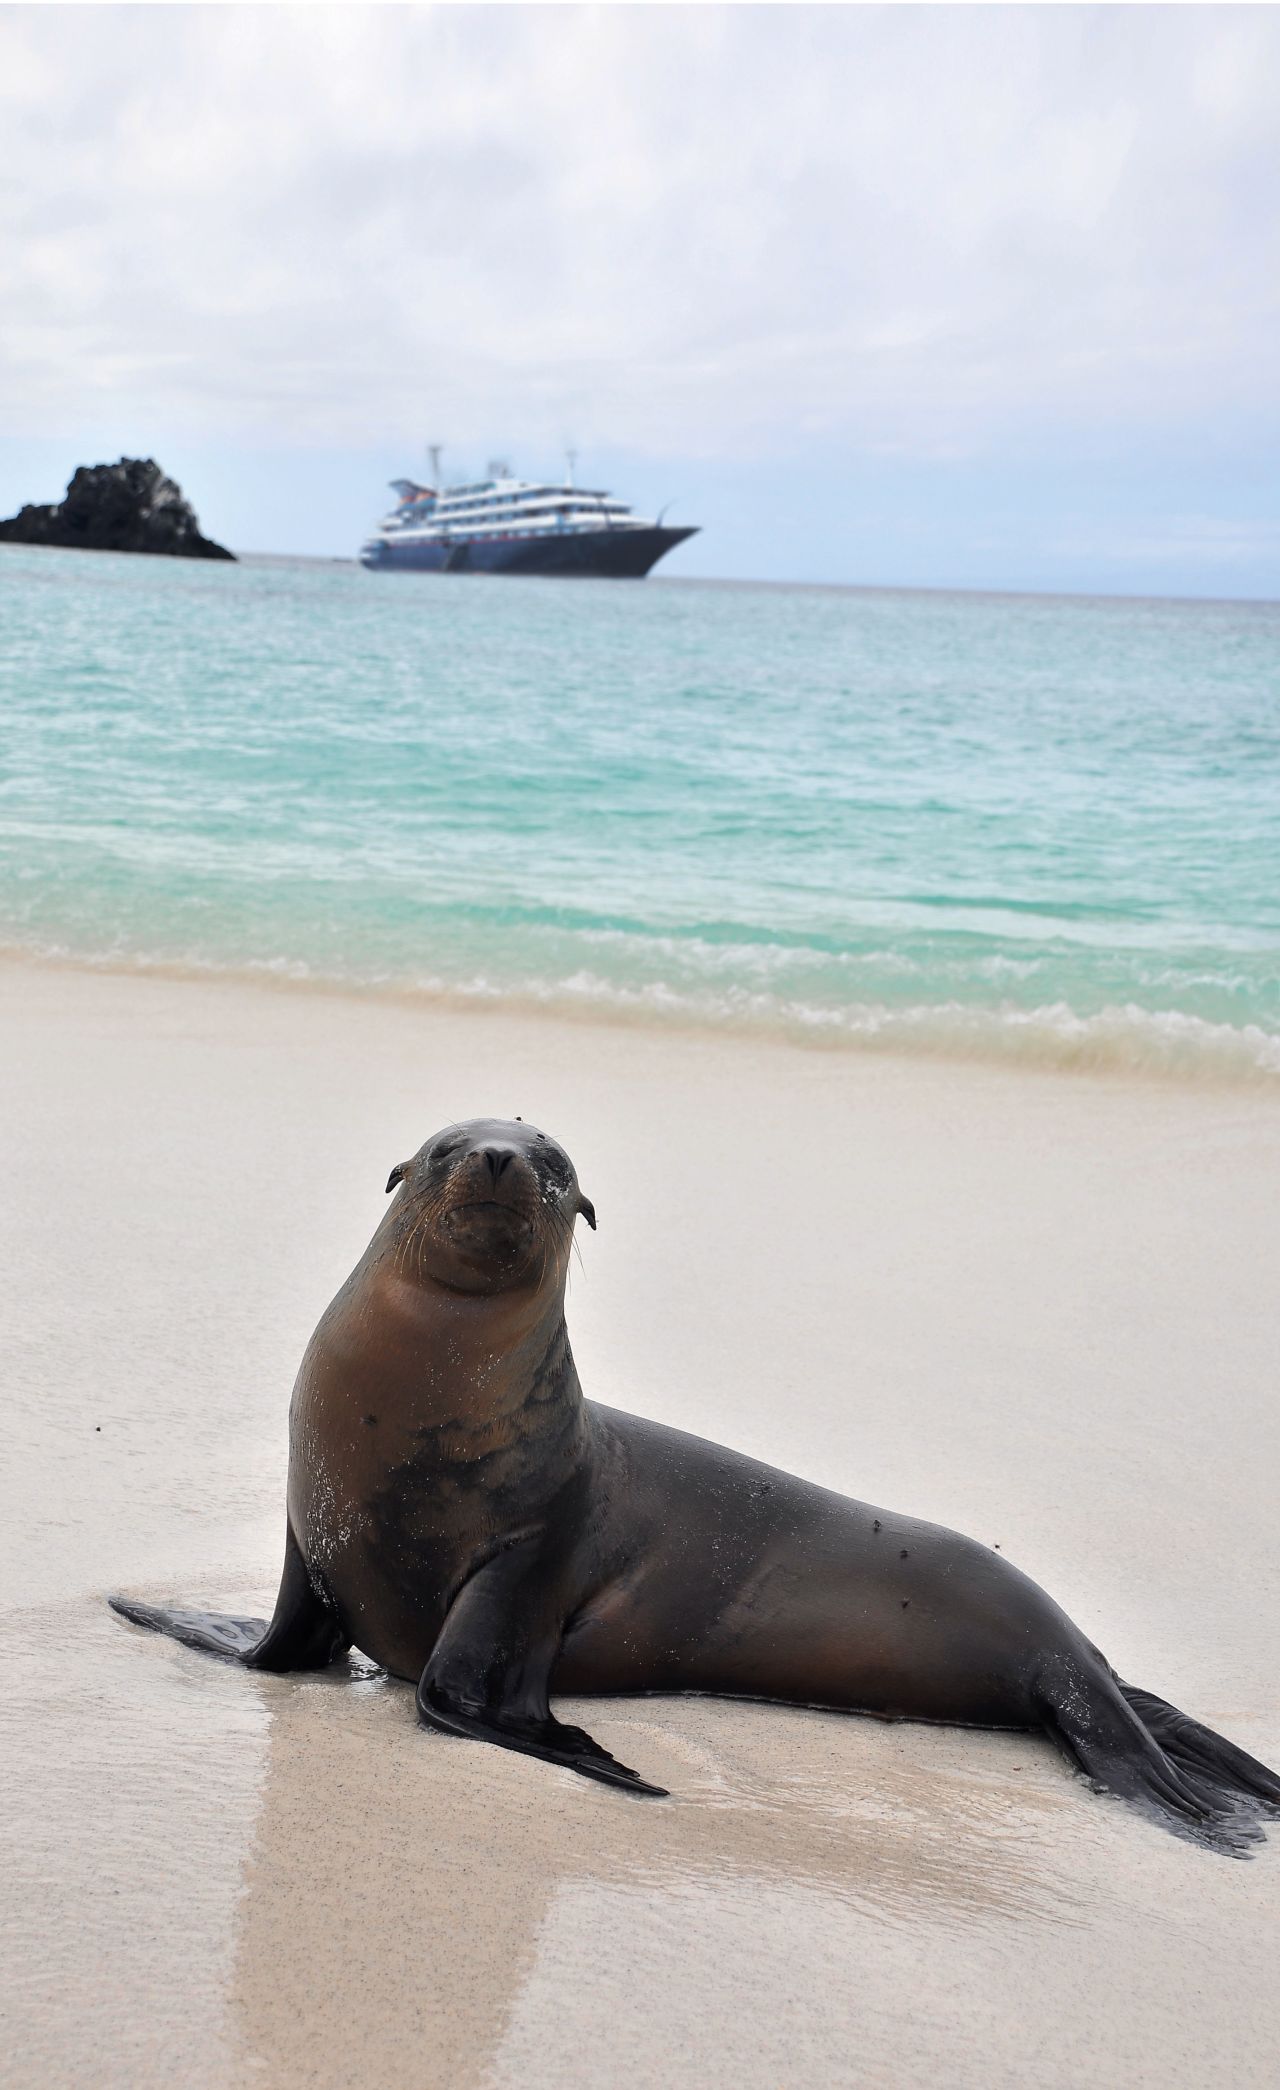 <strong>Galapagos cruise (Ecuador)</strong>: Silversea's wildlife experts from the expedition team will be leading your excursions to the islands famous for inspiring Charles Darwin. When not discovering indigenous animals, you can peruse a library of maps, atlases and charts provided by the Royal Geographical Society.